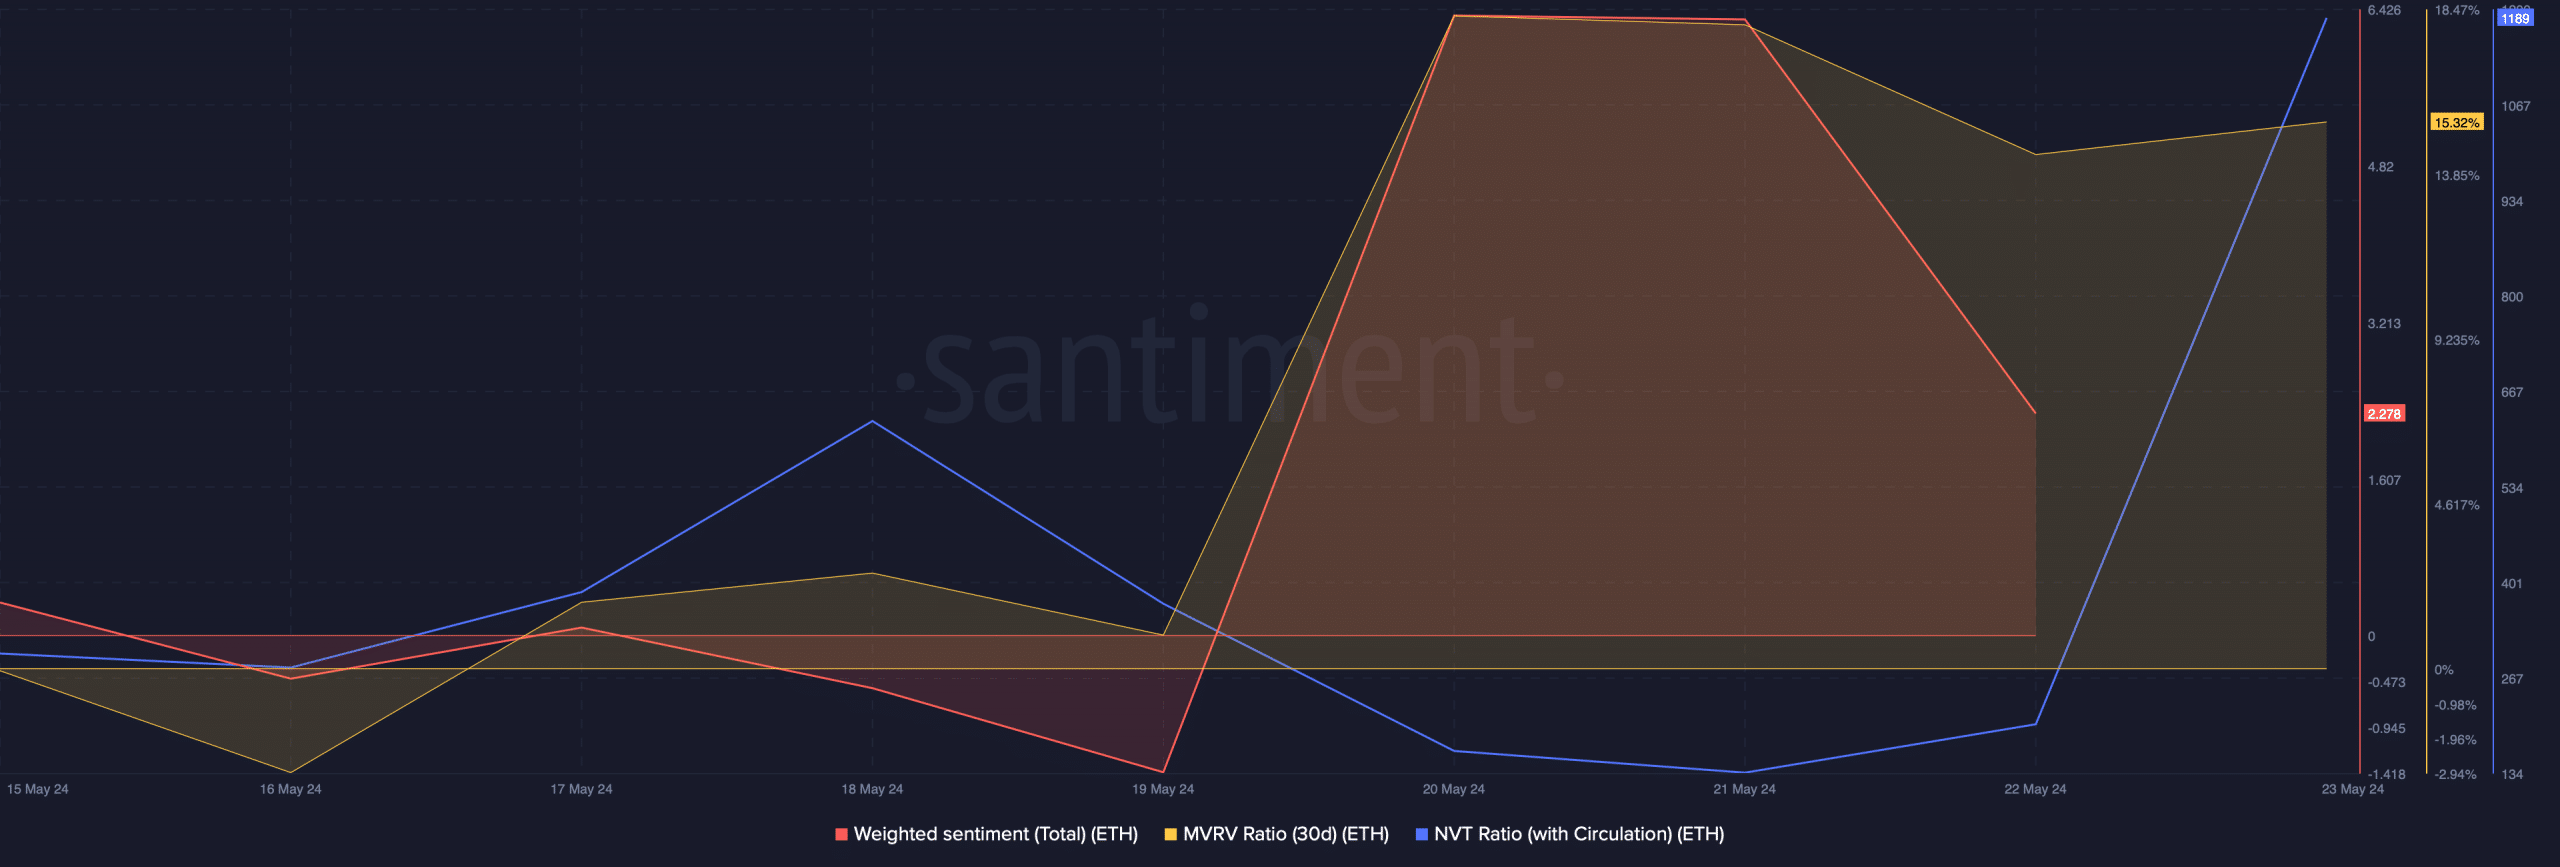 Ethereum's weighted sentiment declined 